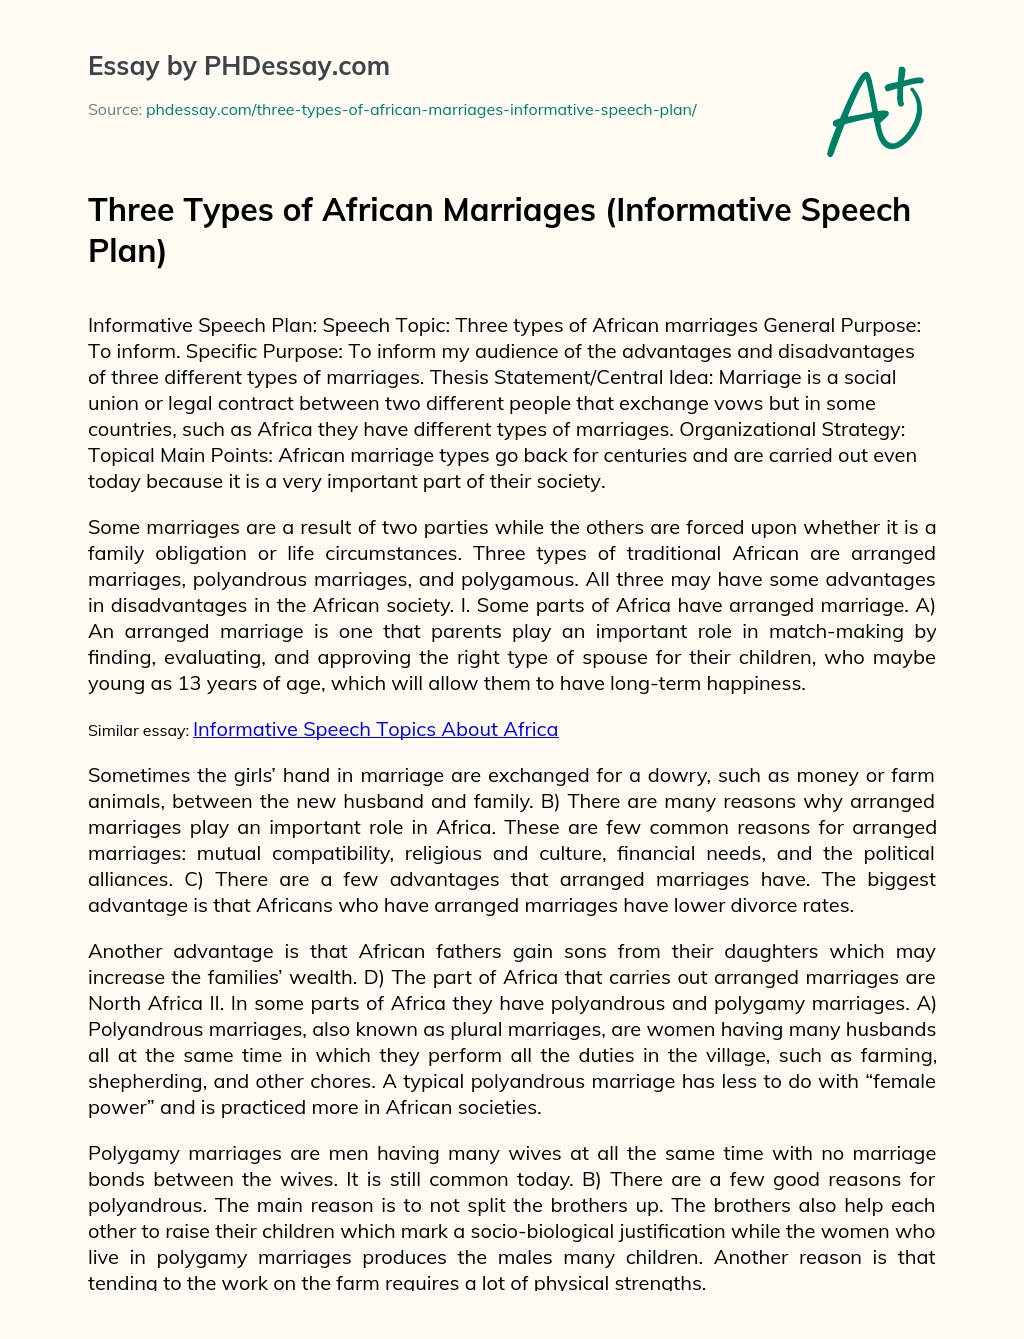 Three Types of African Marriages (Informative Speech Plan) essay